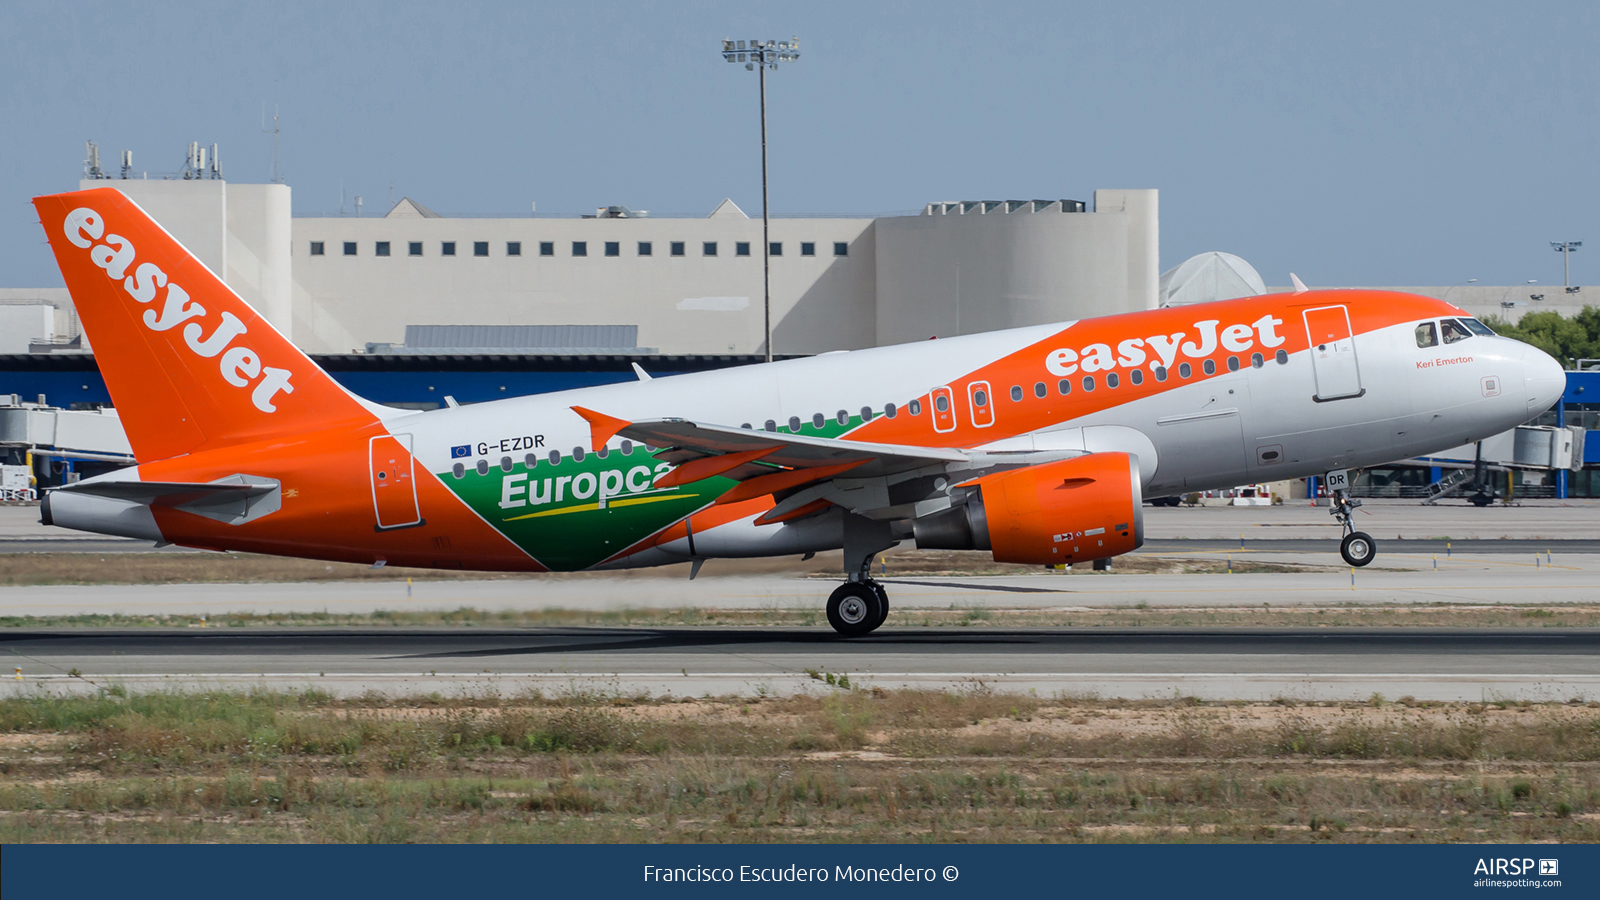 Easyjet  Airbus A319  G-EZDR